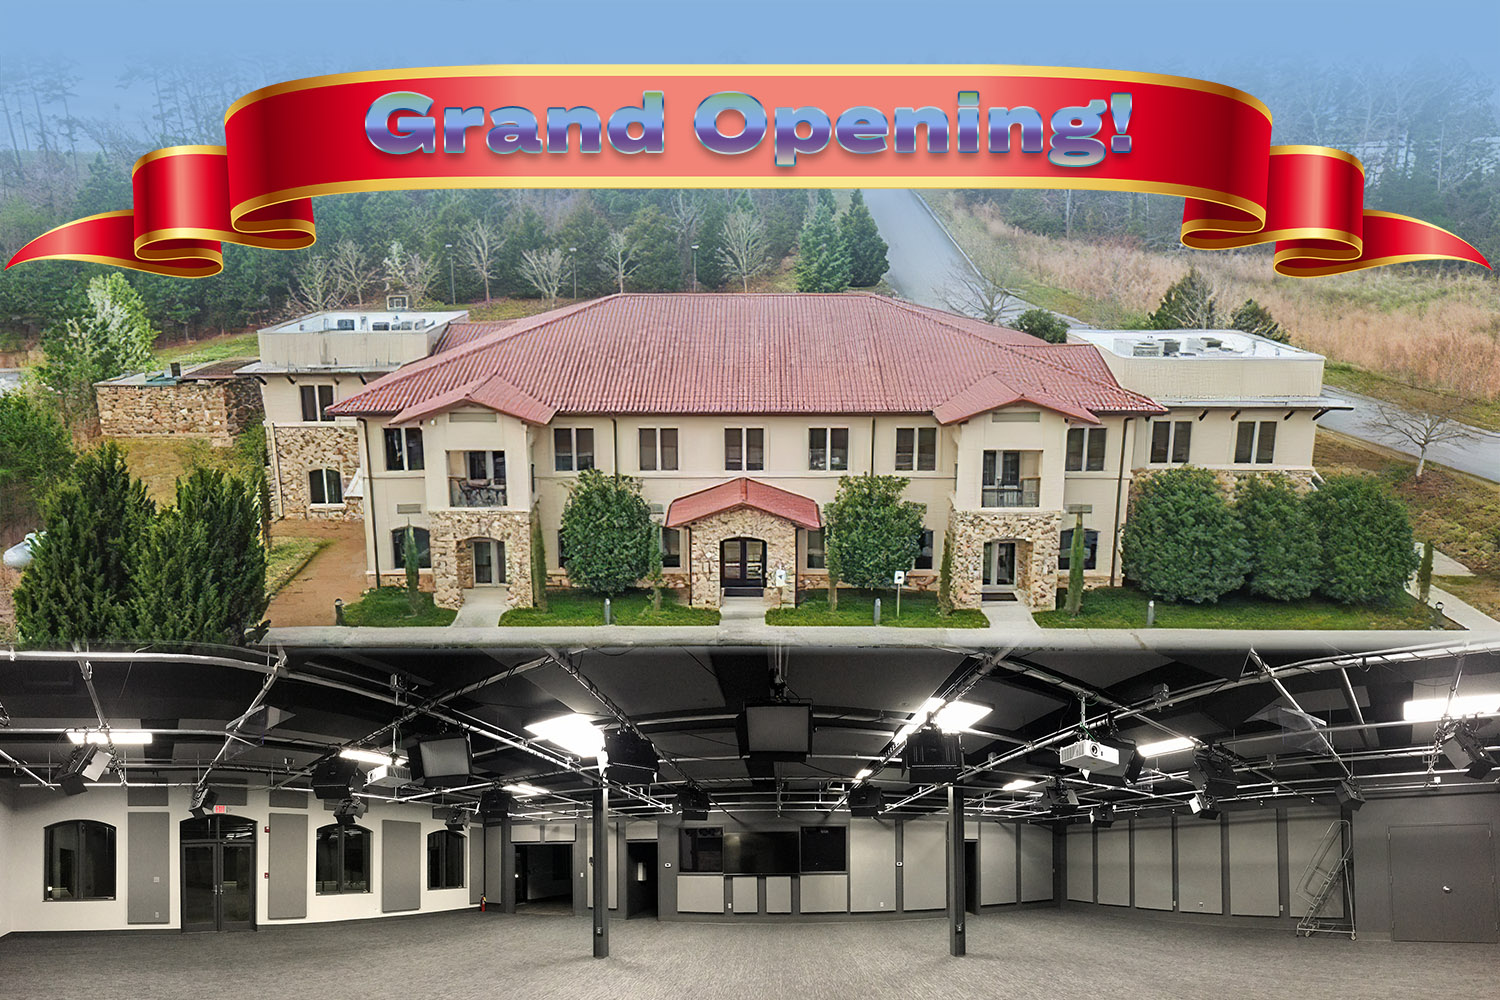 Come And Reason Ministries Has Grand Opening!